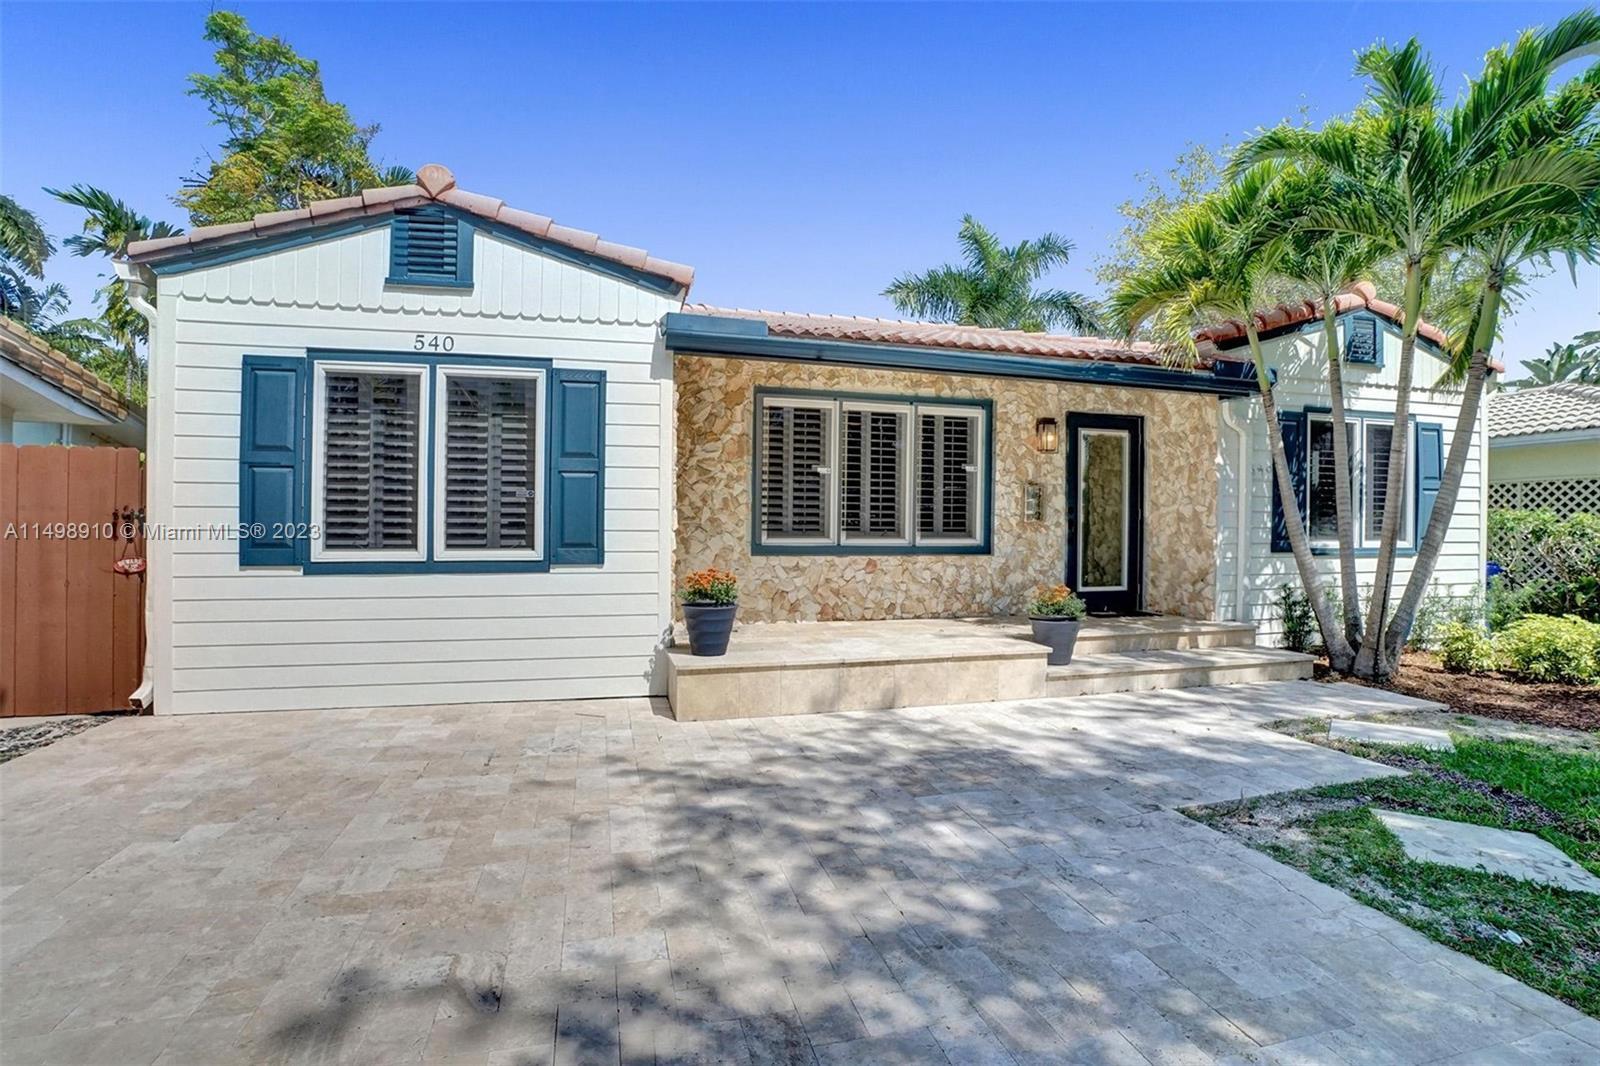 Photo of 540 NE 11th Ave in Fort Lauderdale, FL